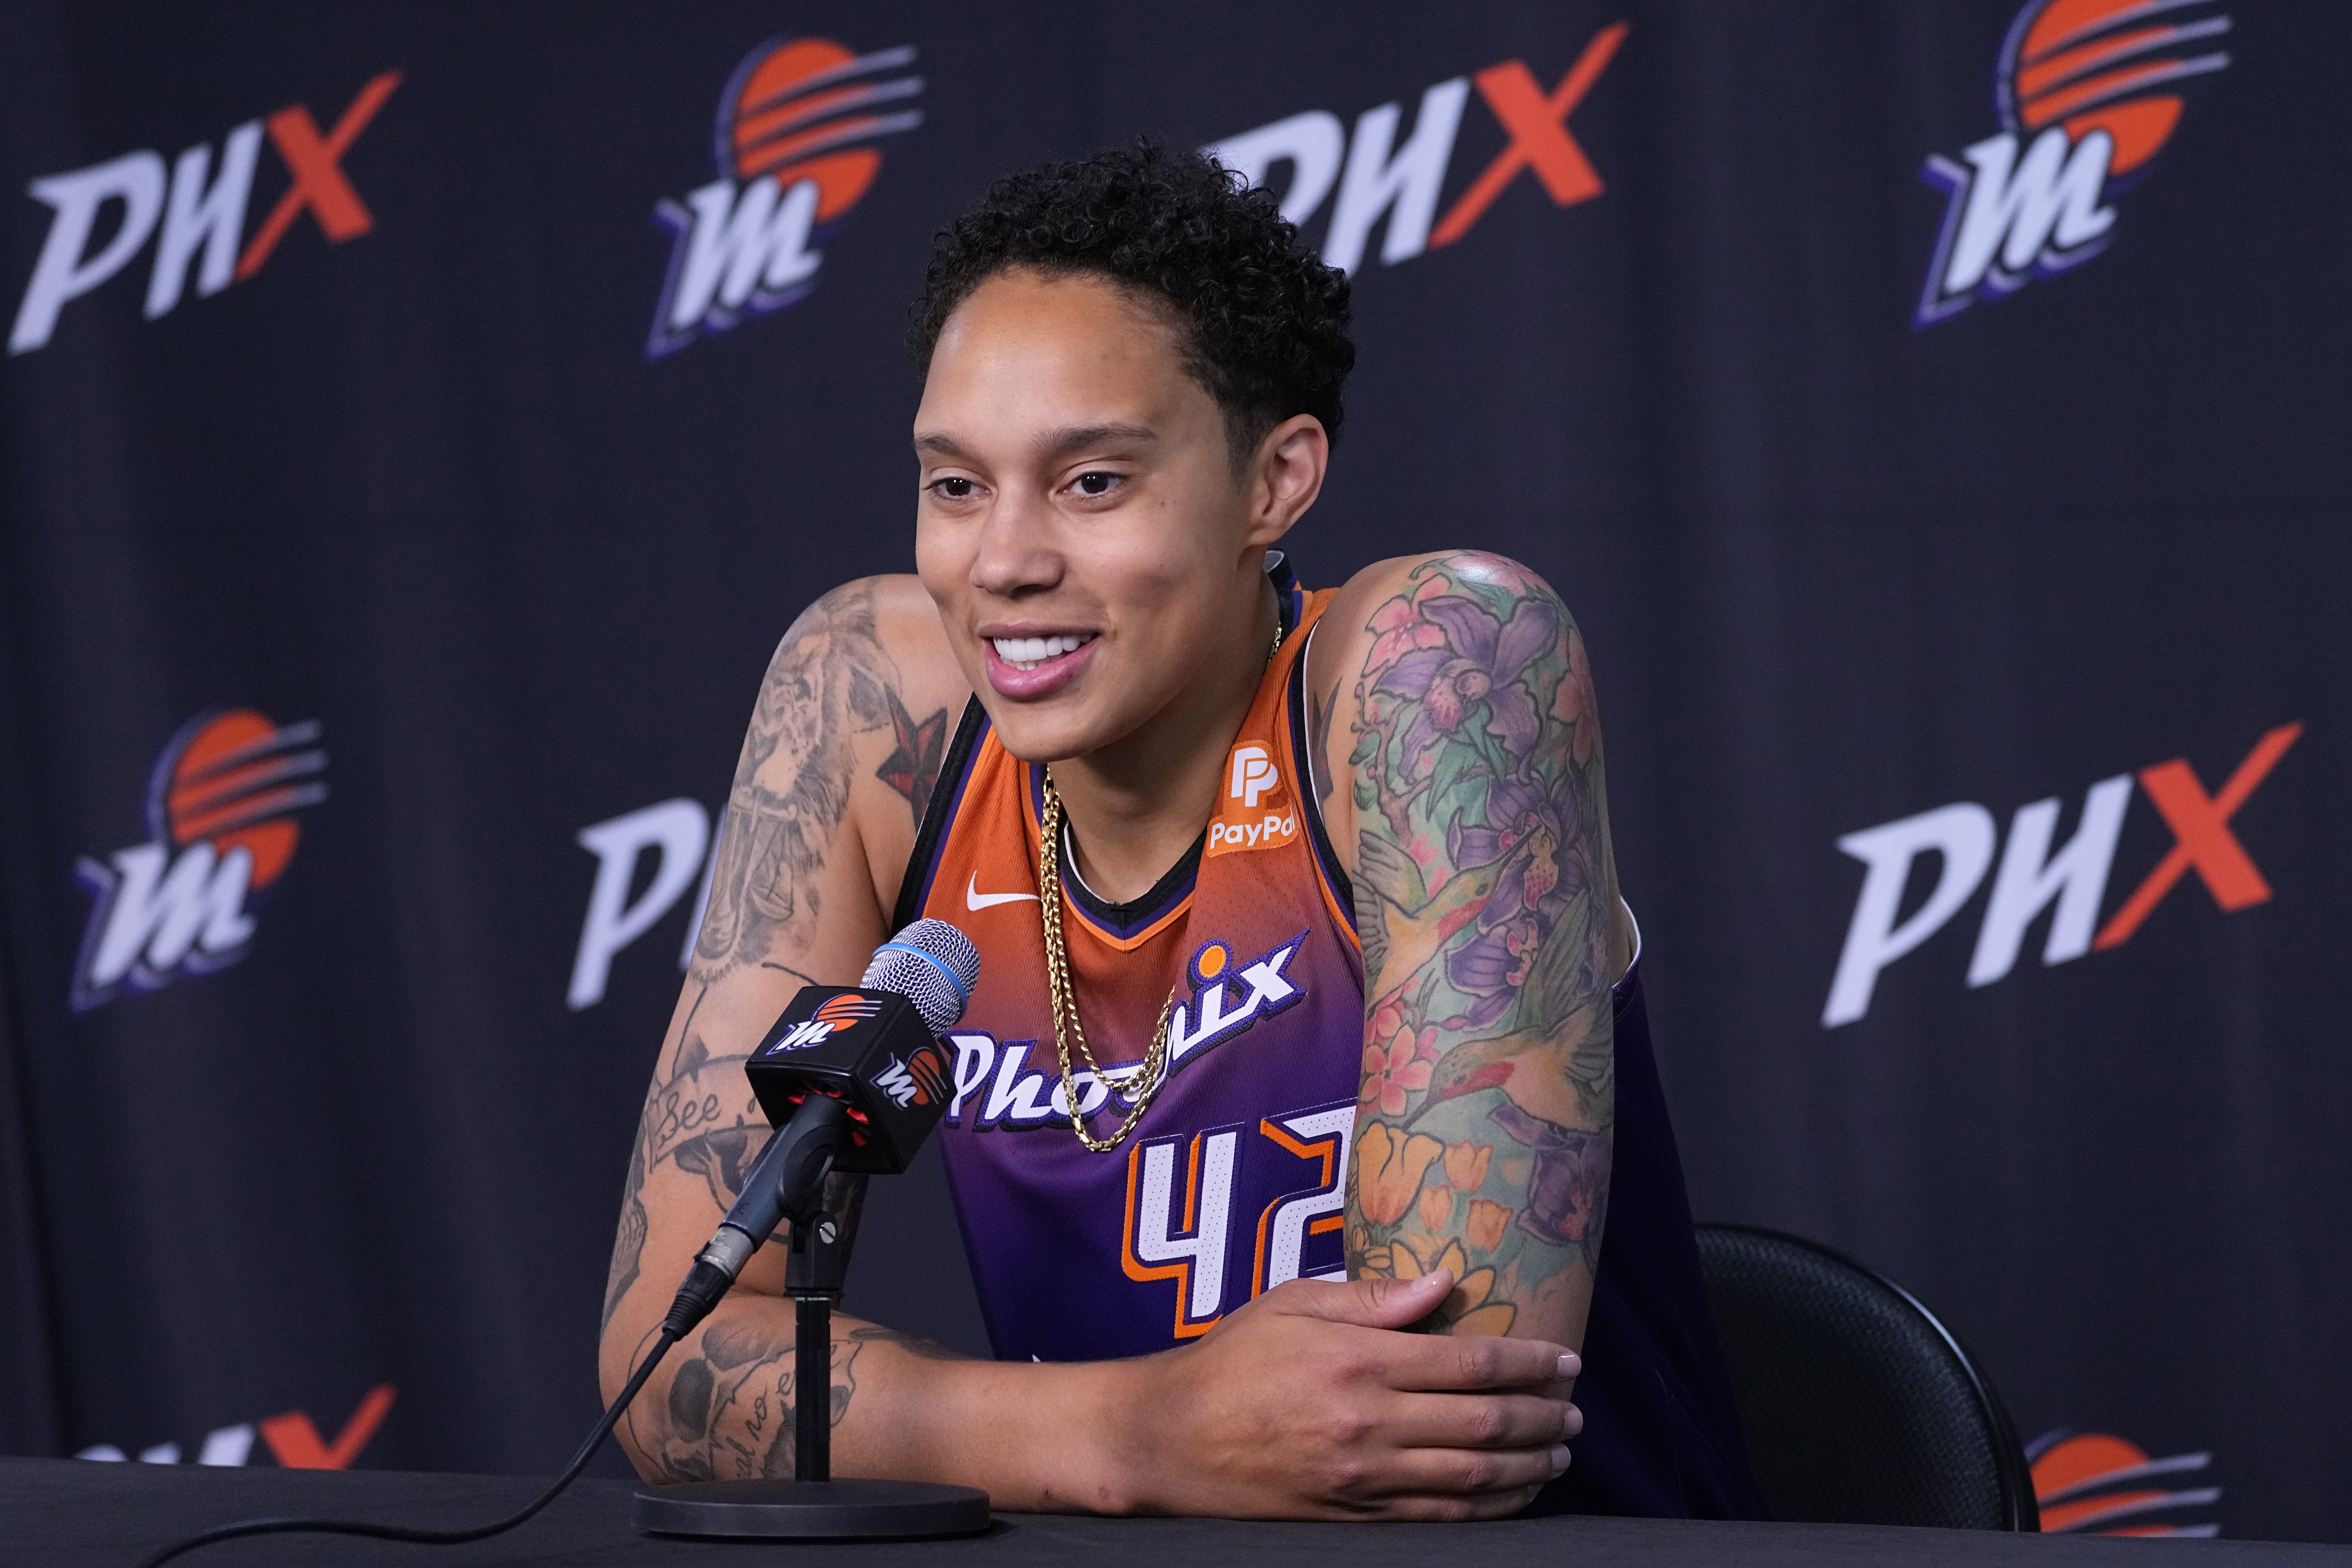 177-Year-Old Texas University's “Frustrating Hypocrisy” Irked Brittney  Griner While She Was Playing There - EssentiallySports